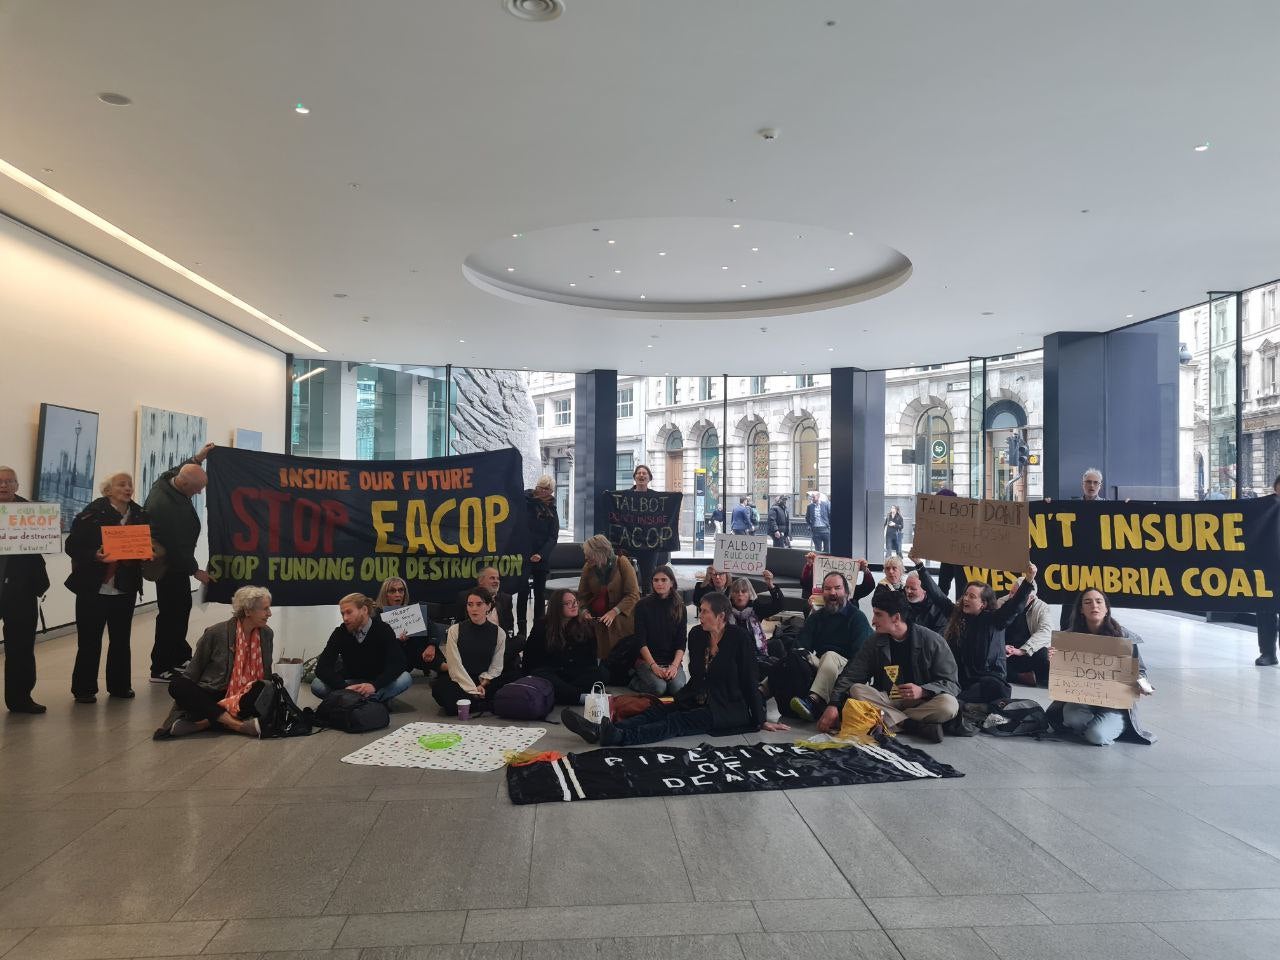 Fossil Free London protestors inside the office Talbot Insurance holding banners saying ‘Don’t Insure EACOP’ and ‘Don’t Insure West Cumbria Mine’